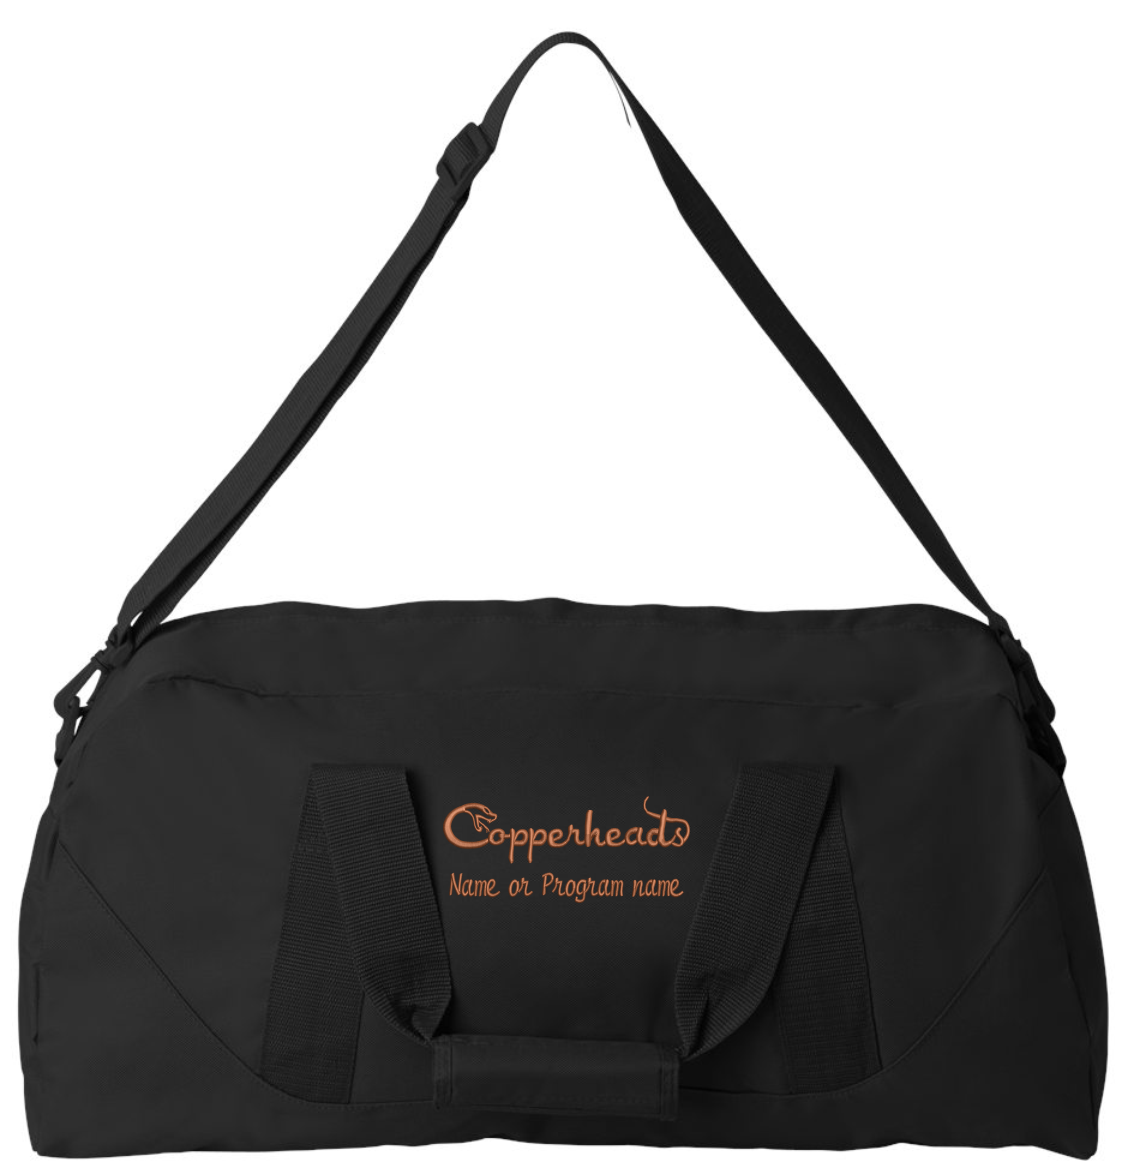 Copperheads Embroidered Large Duffel Bag